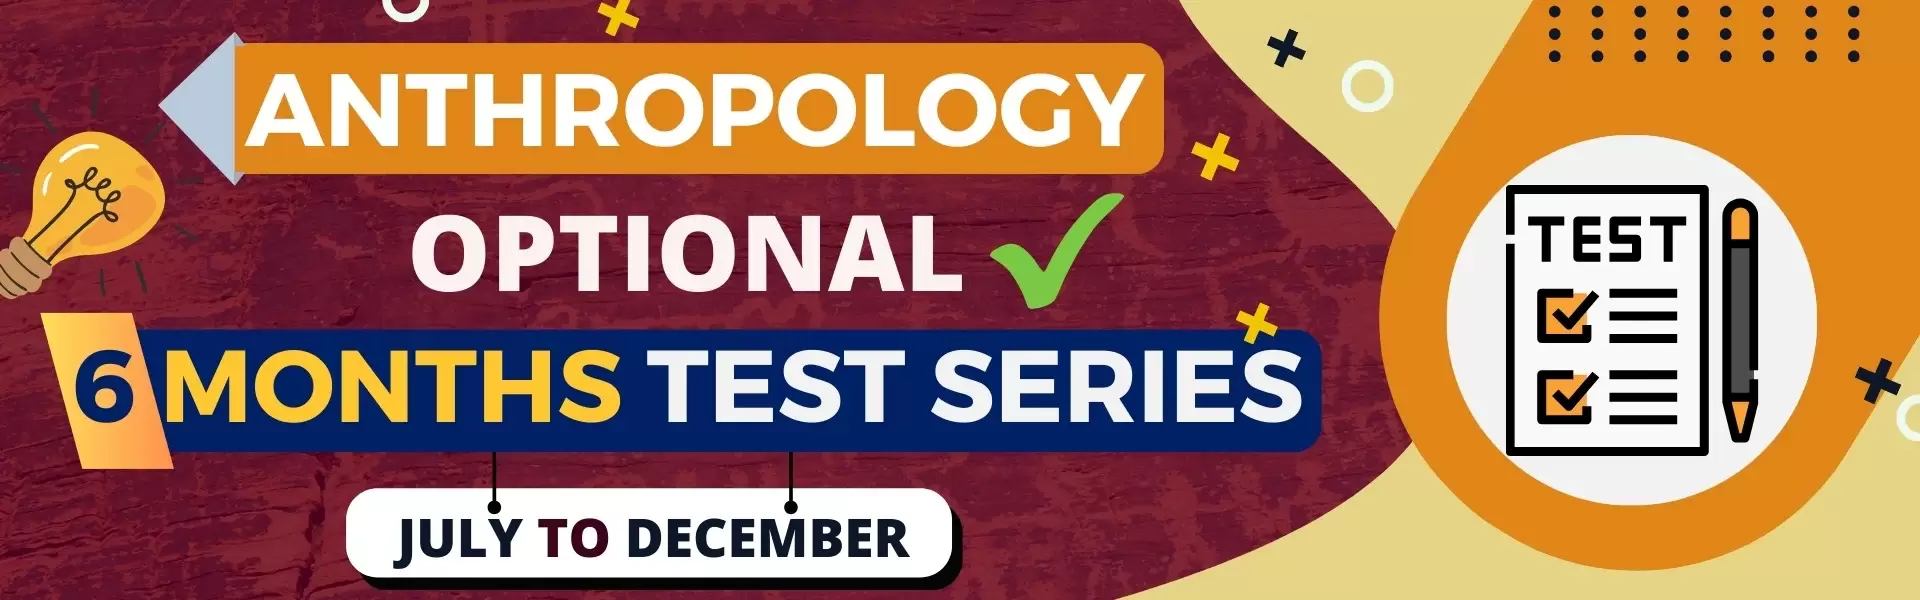 Anthropology optional 6 Months Test Series